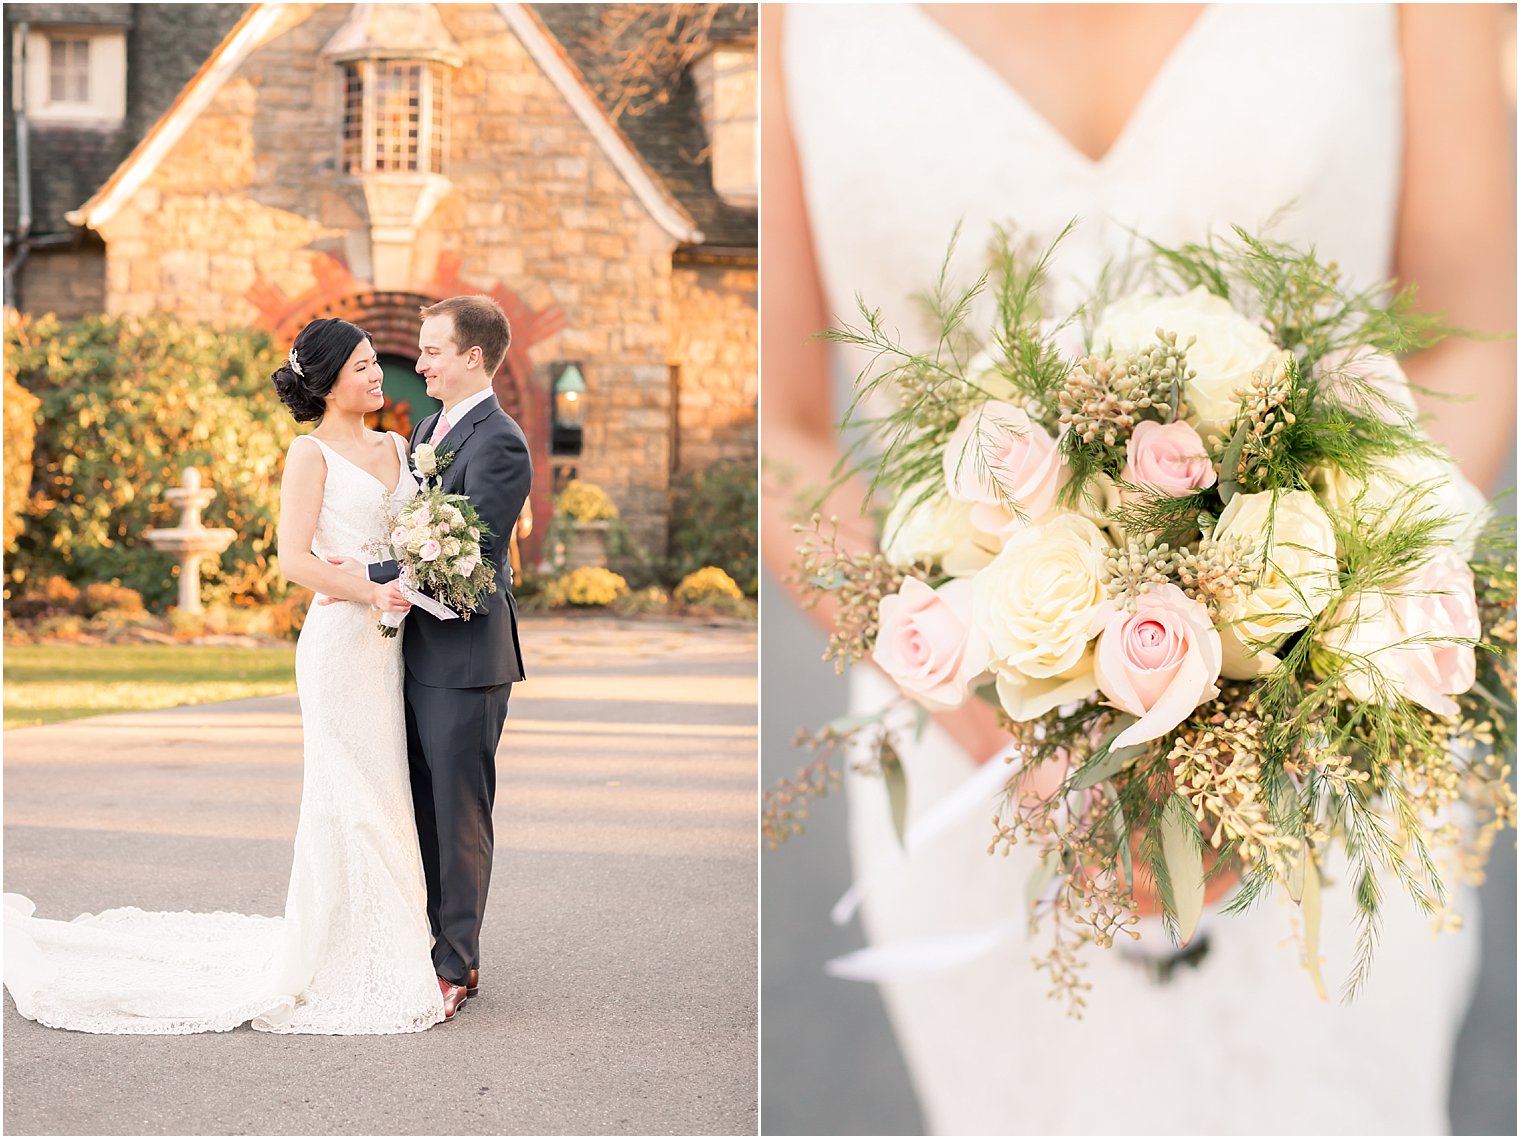 Romantic florals for a fall wedding